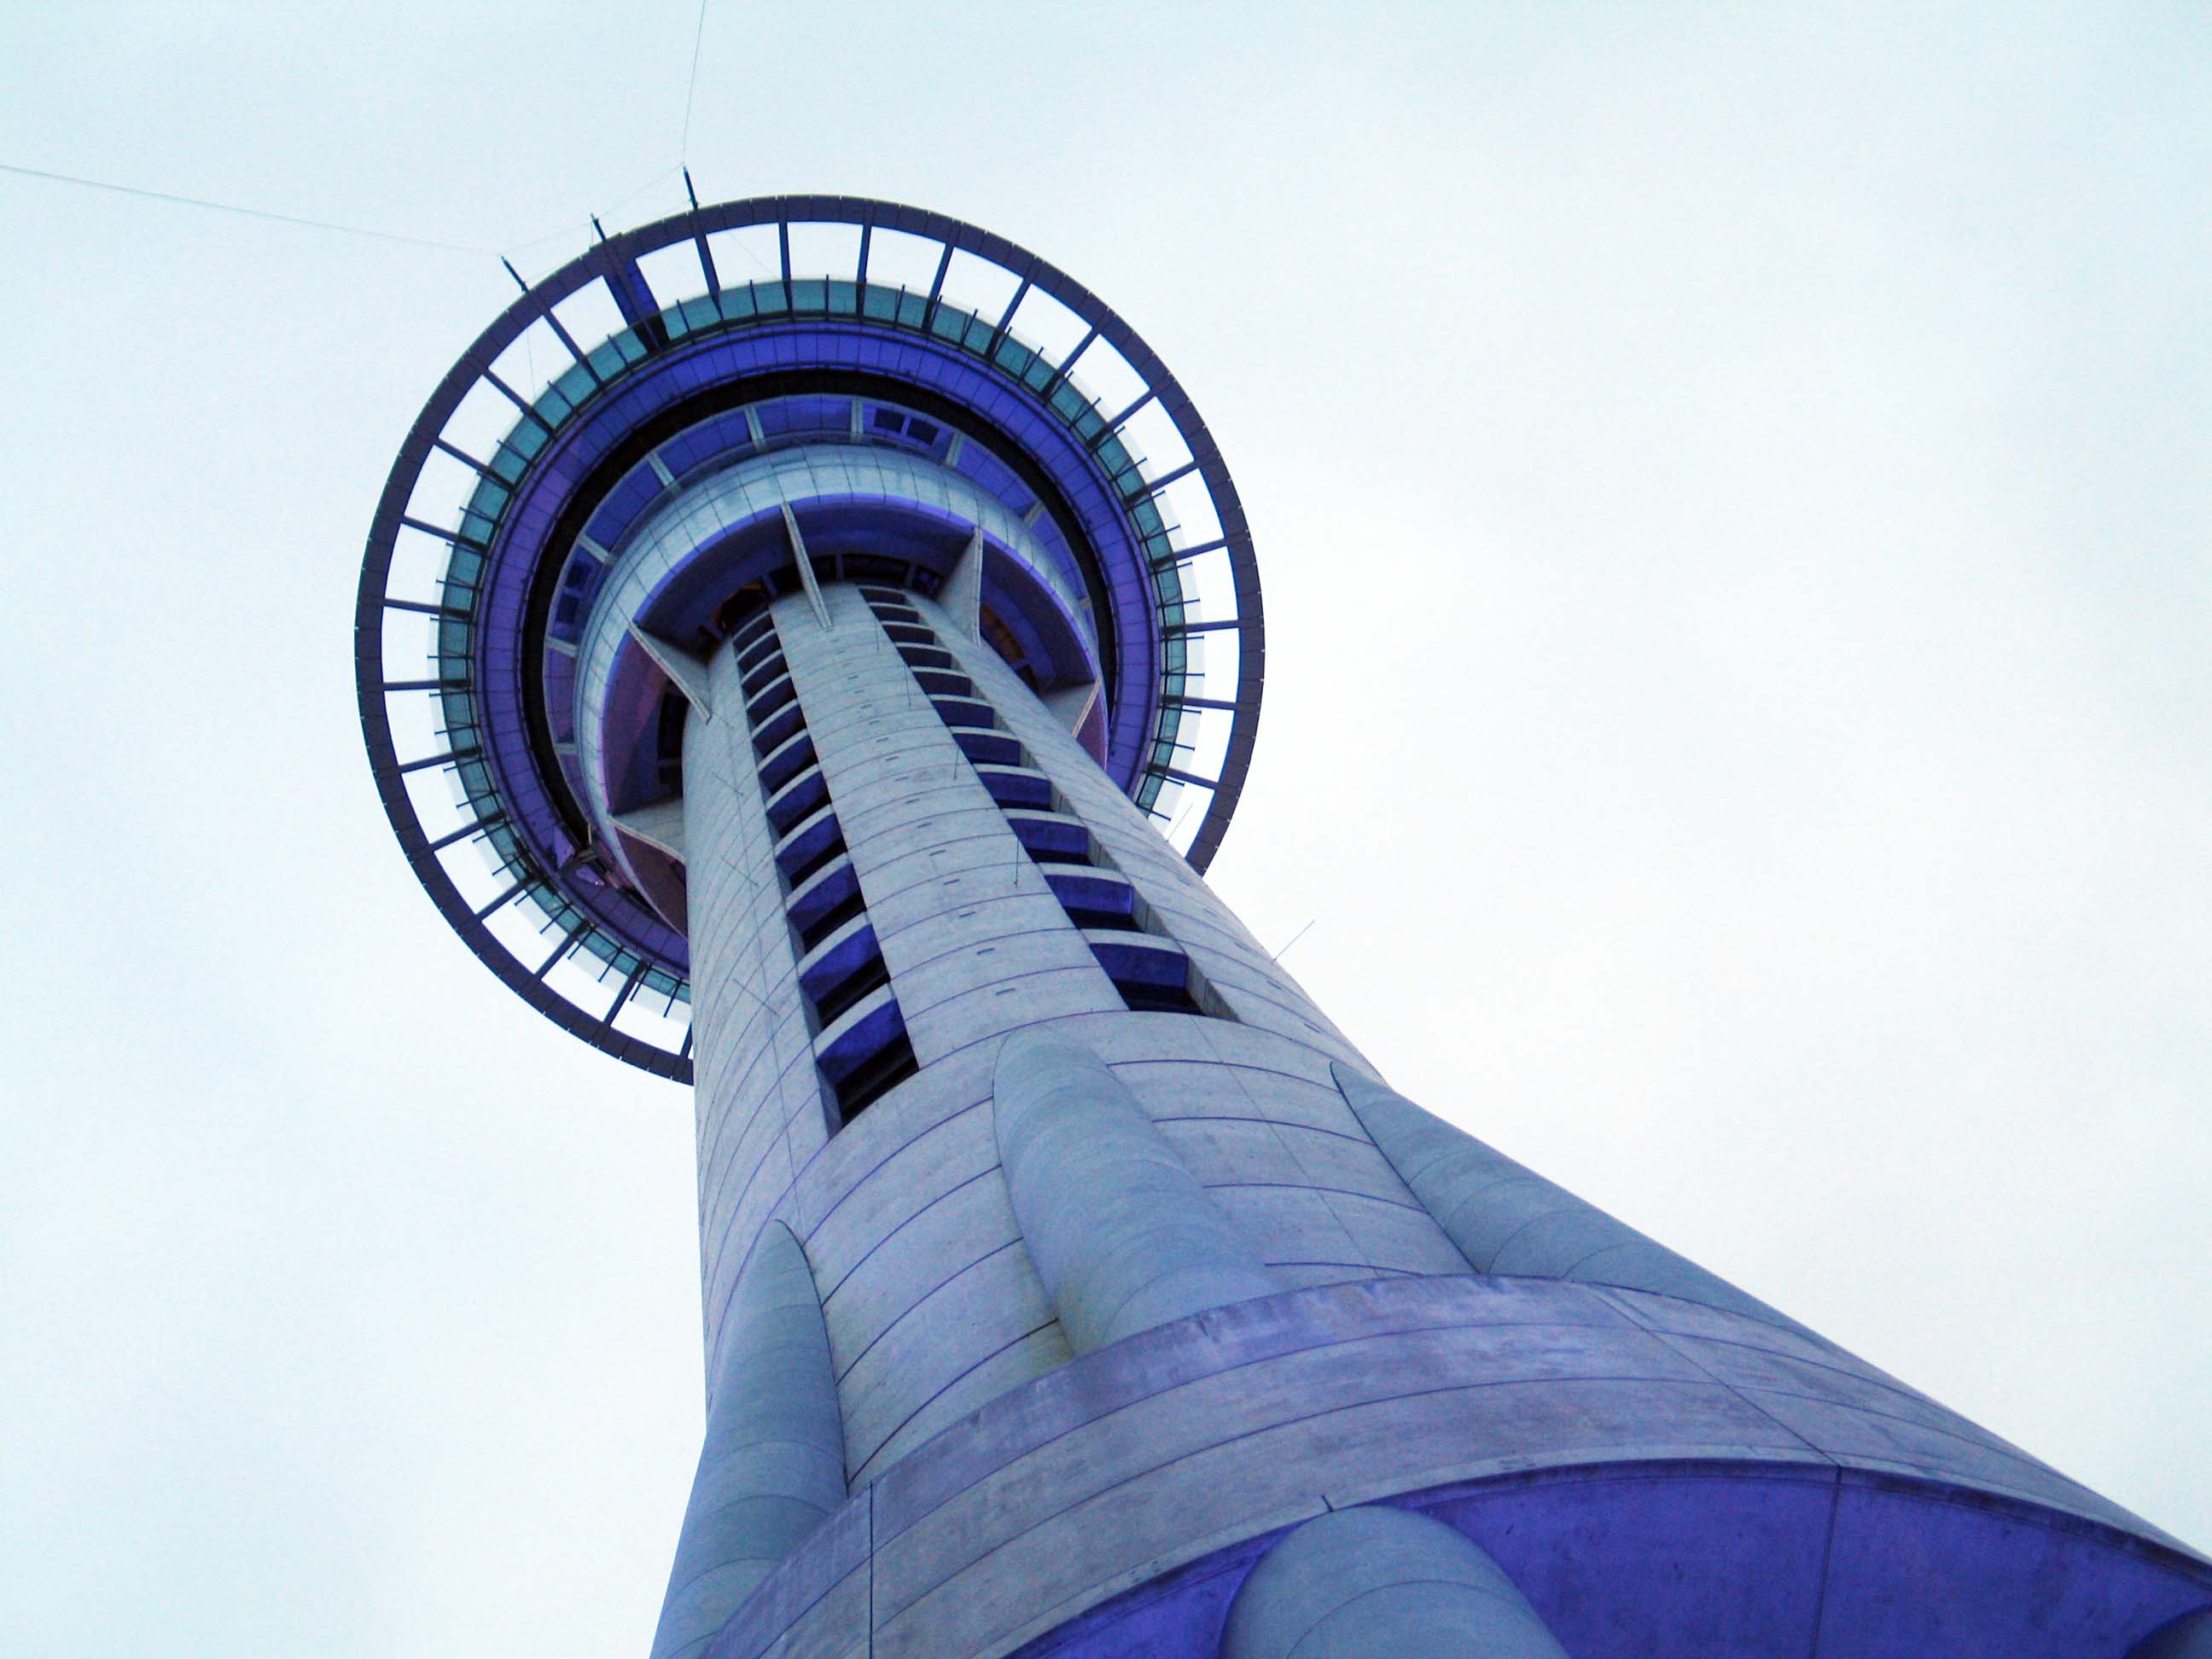 Tower views in Auckland and Toronto